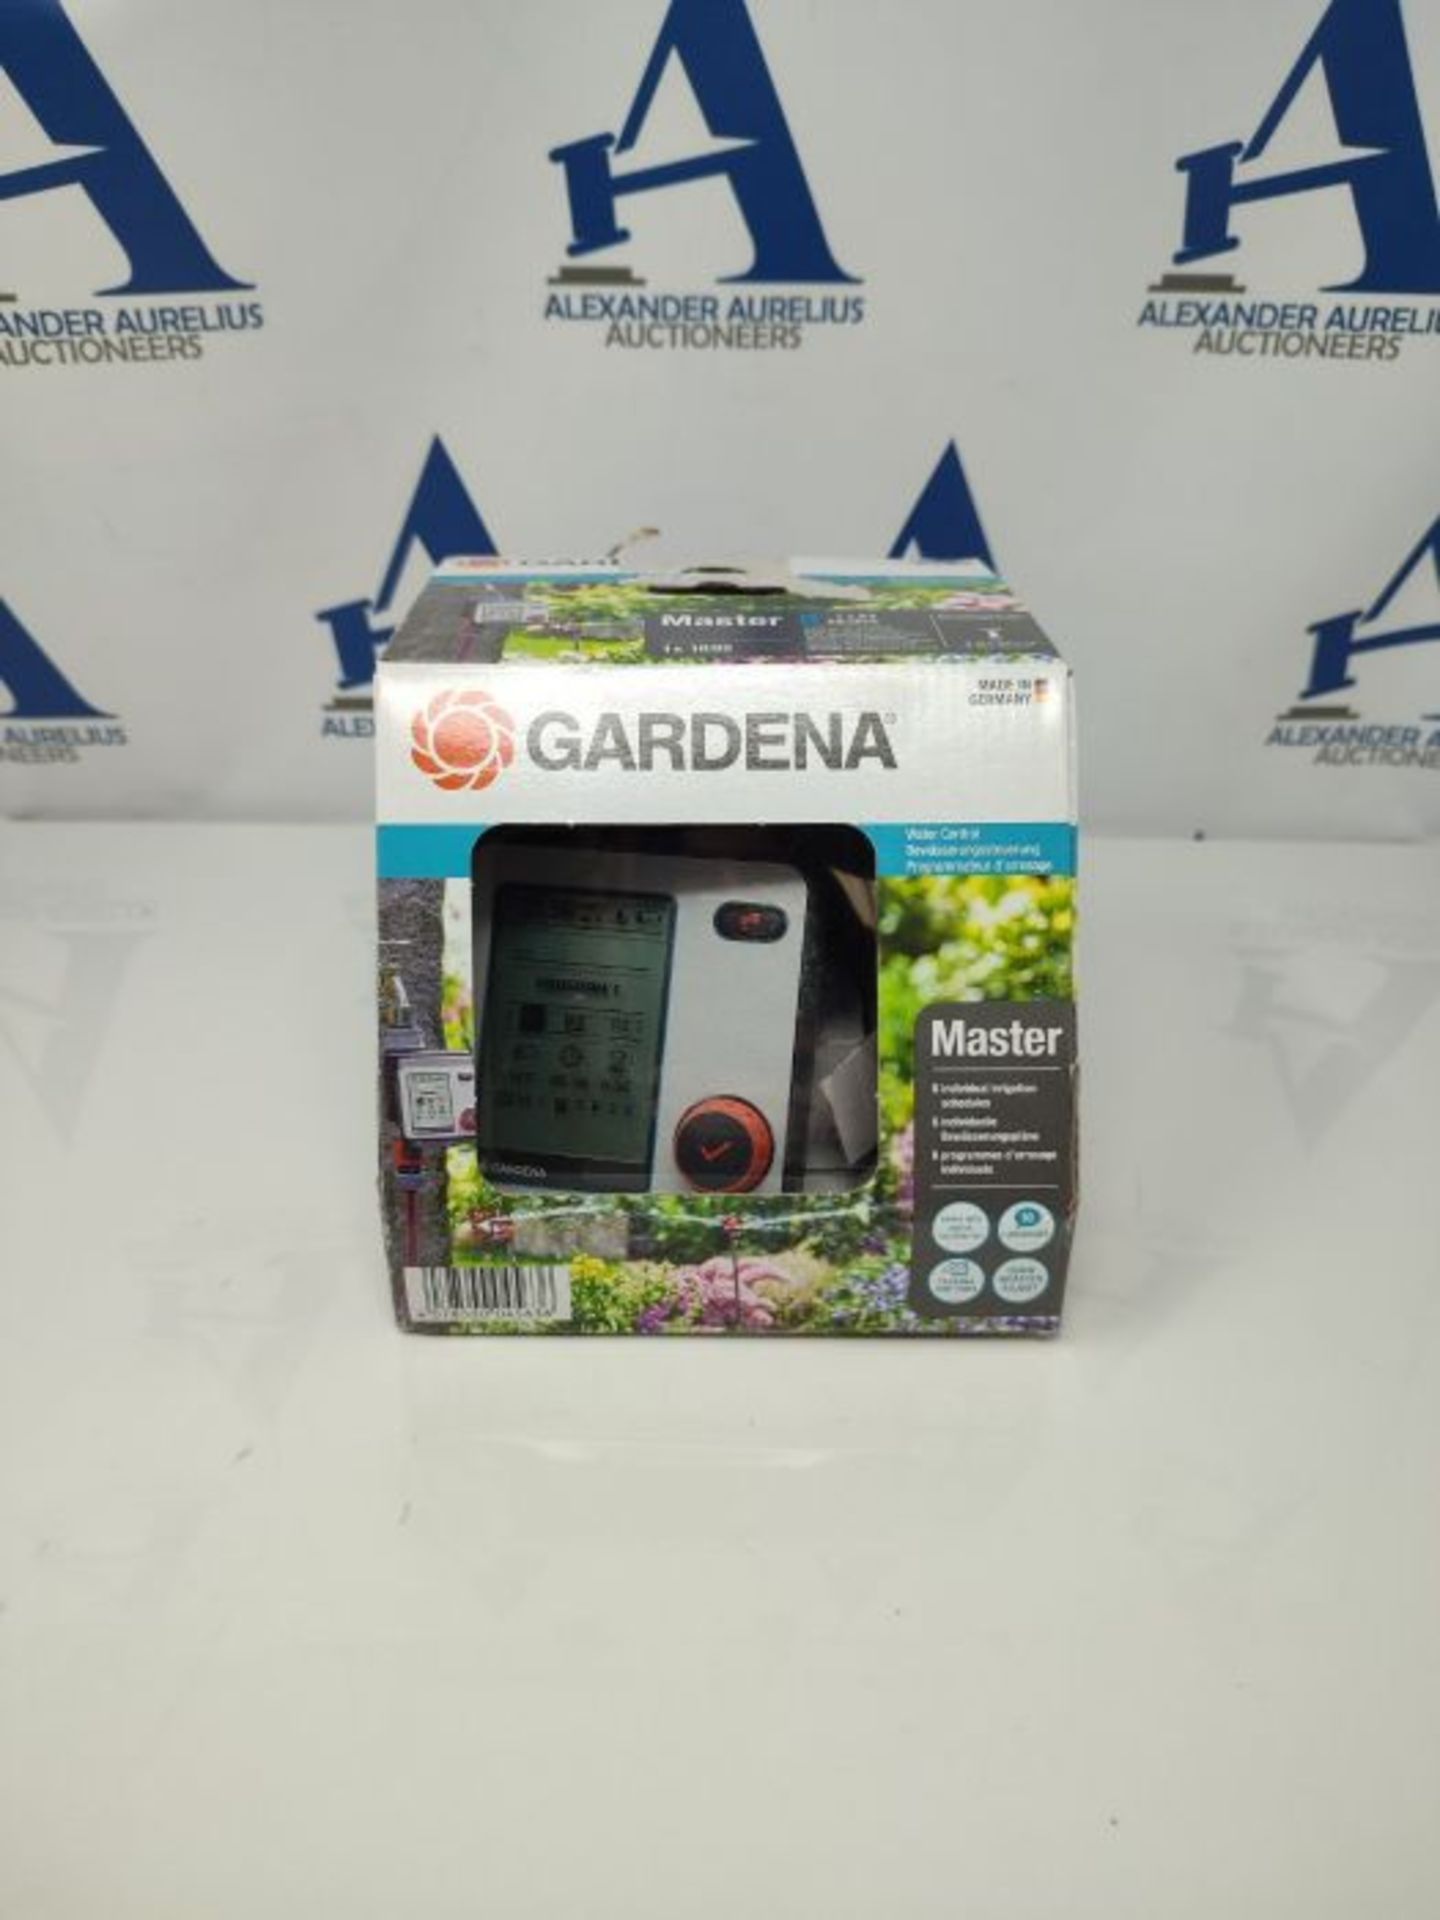 RRP £58.00 Gardena Watering Control Master: And Time-Saving Watering, 6 Schedules, LCD Display, W - Image 2 of 3